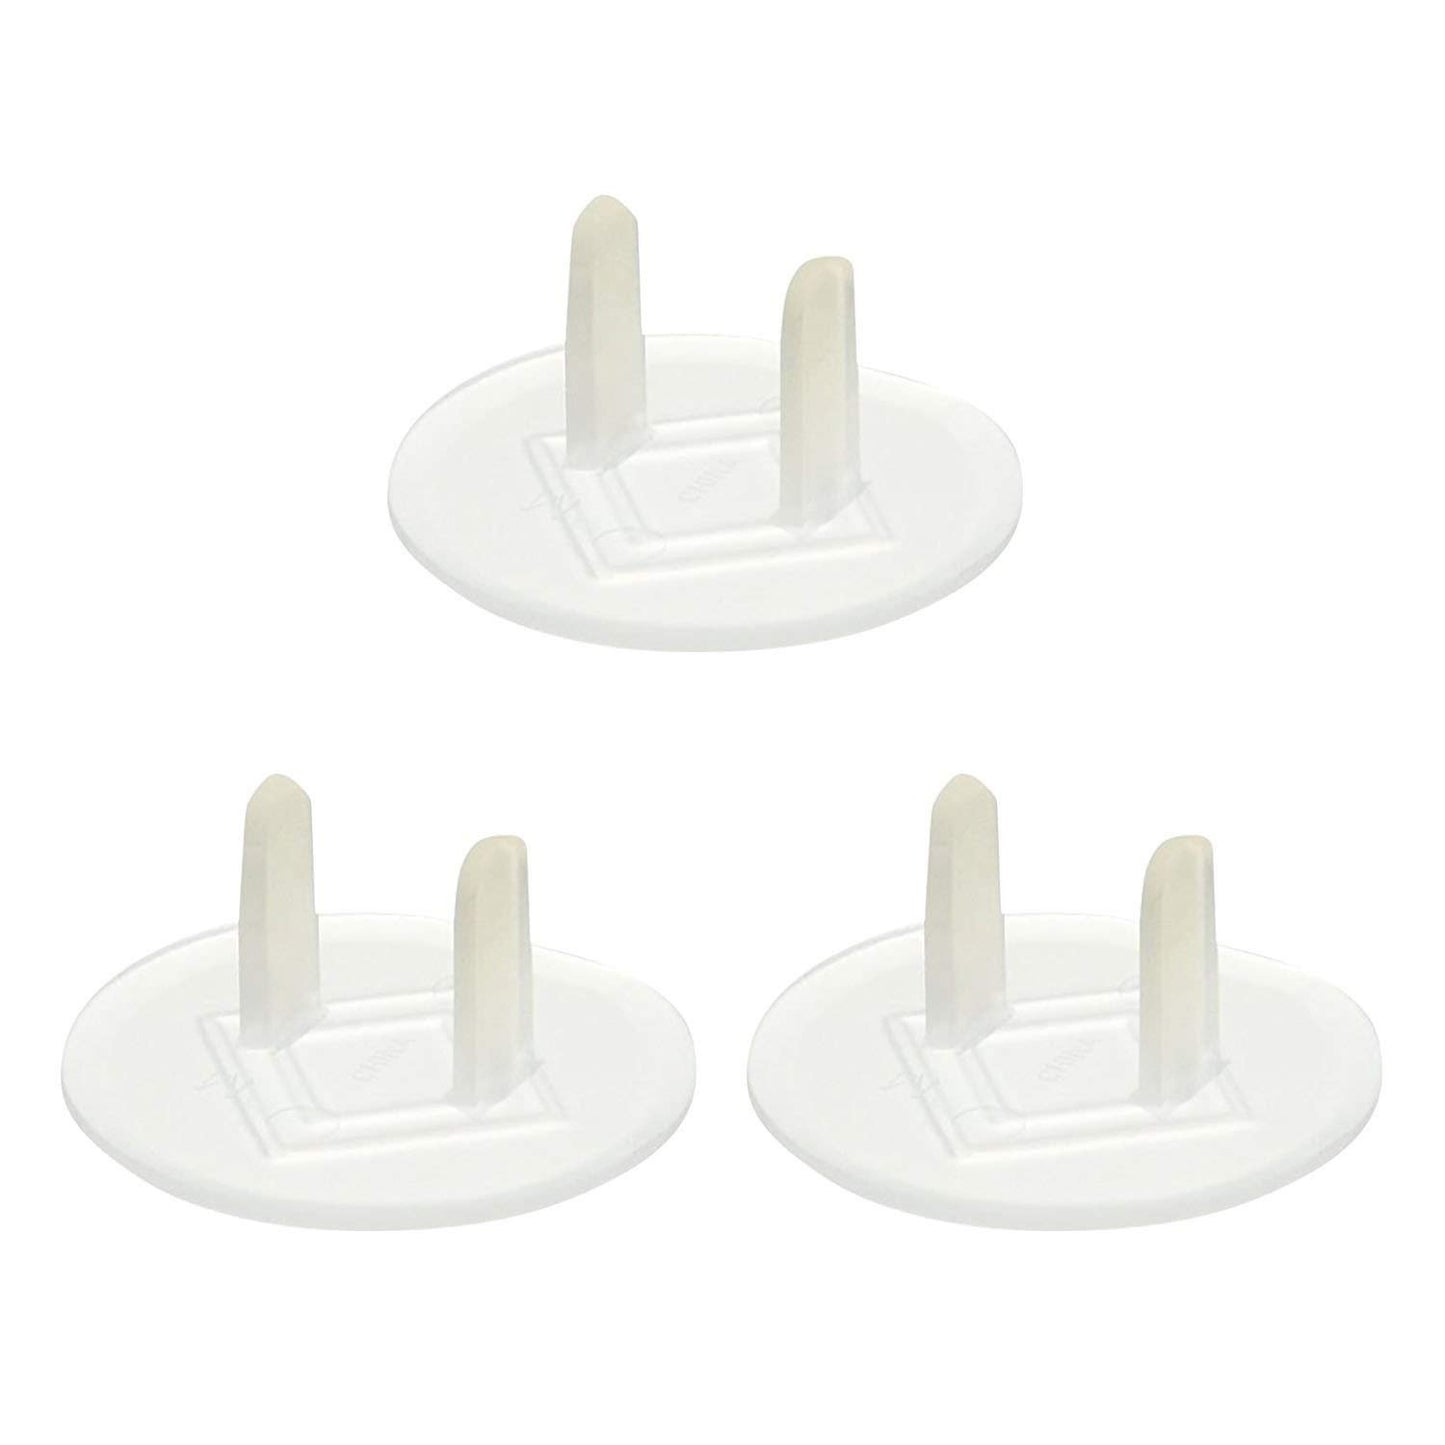 Mommys Helper - Outlet Plugs, (108 Count) (3 Packs Of 36 Count)